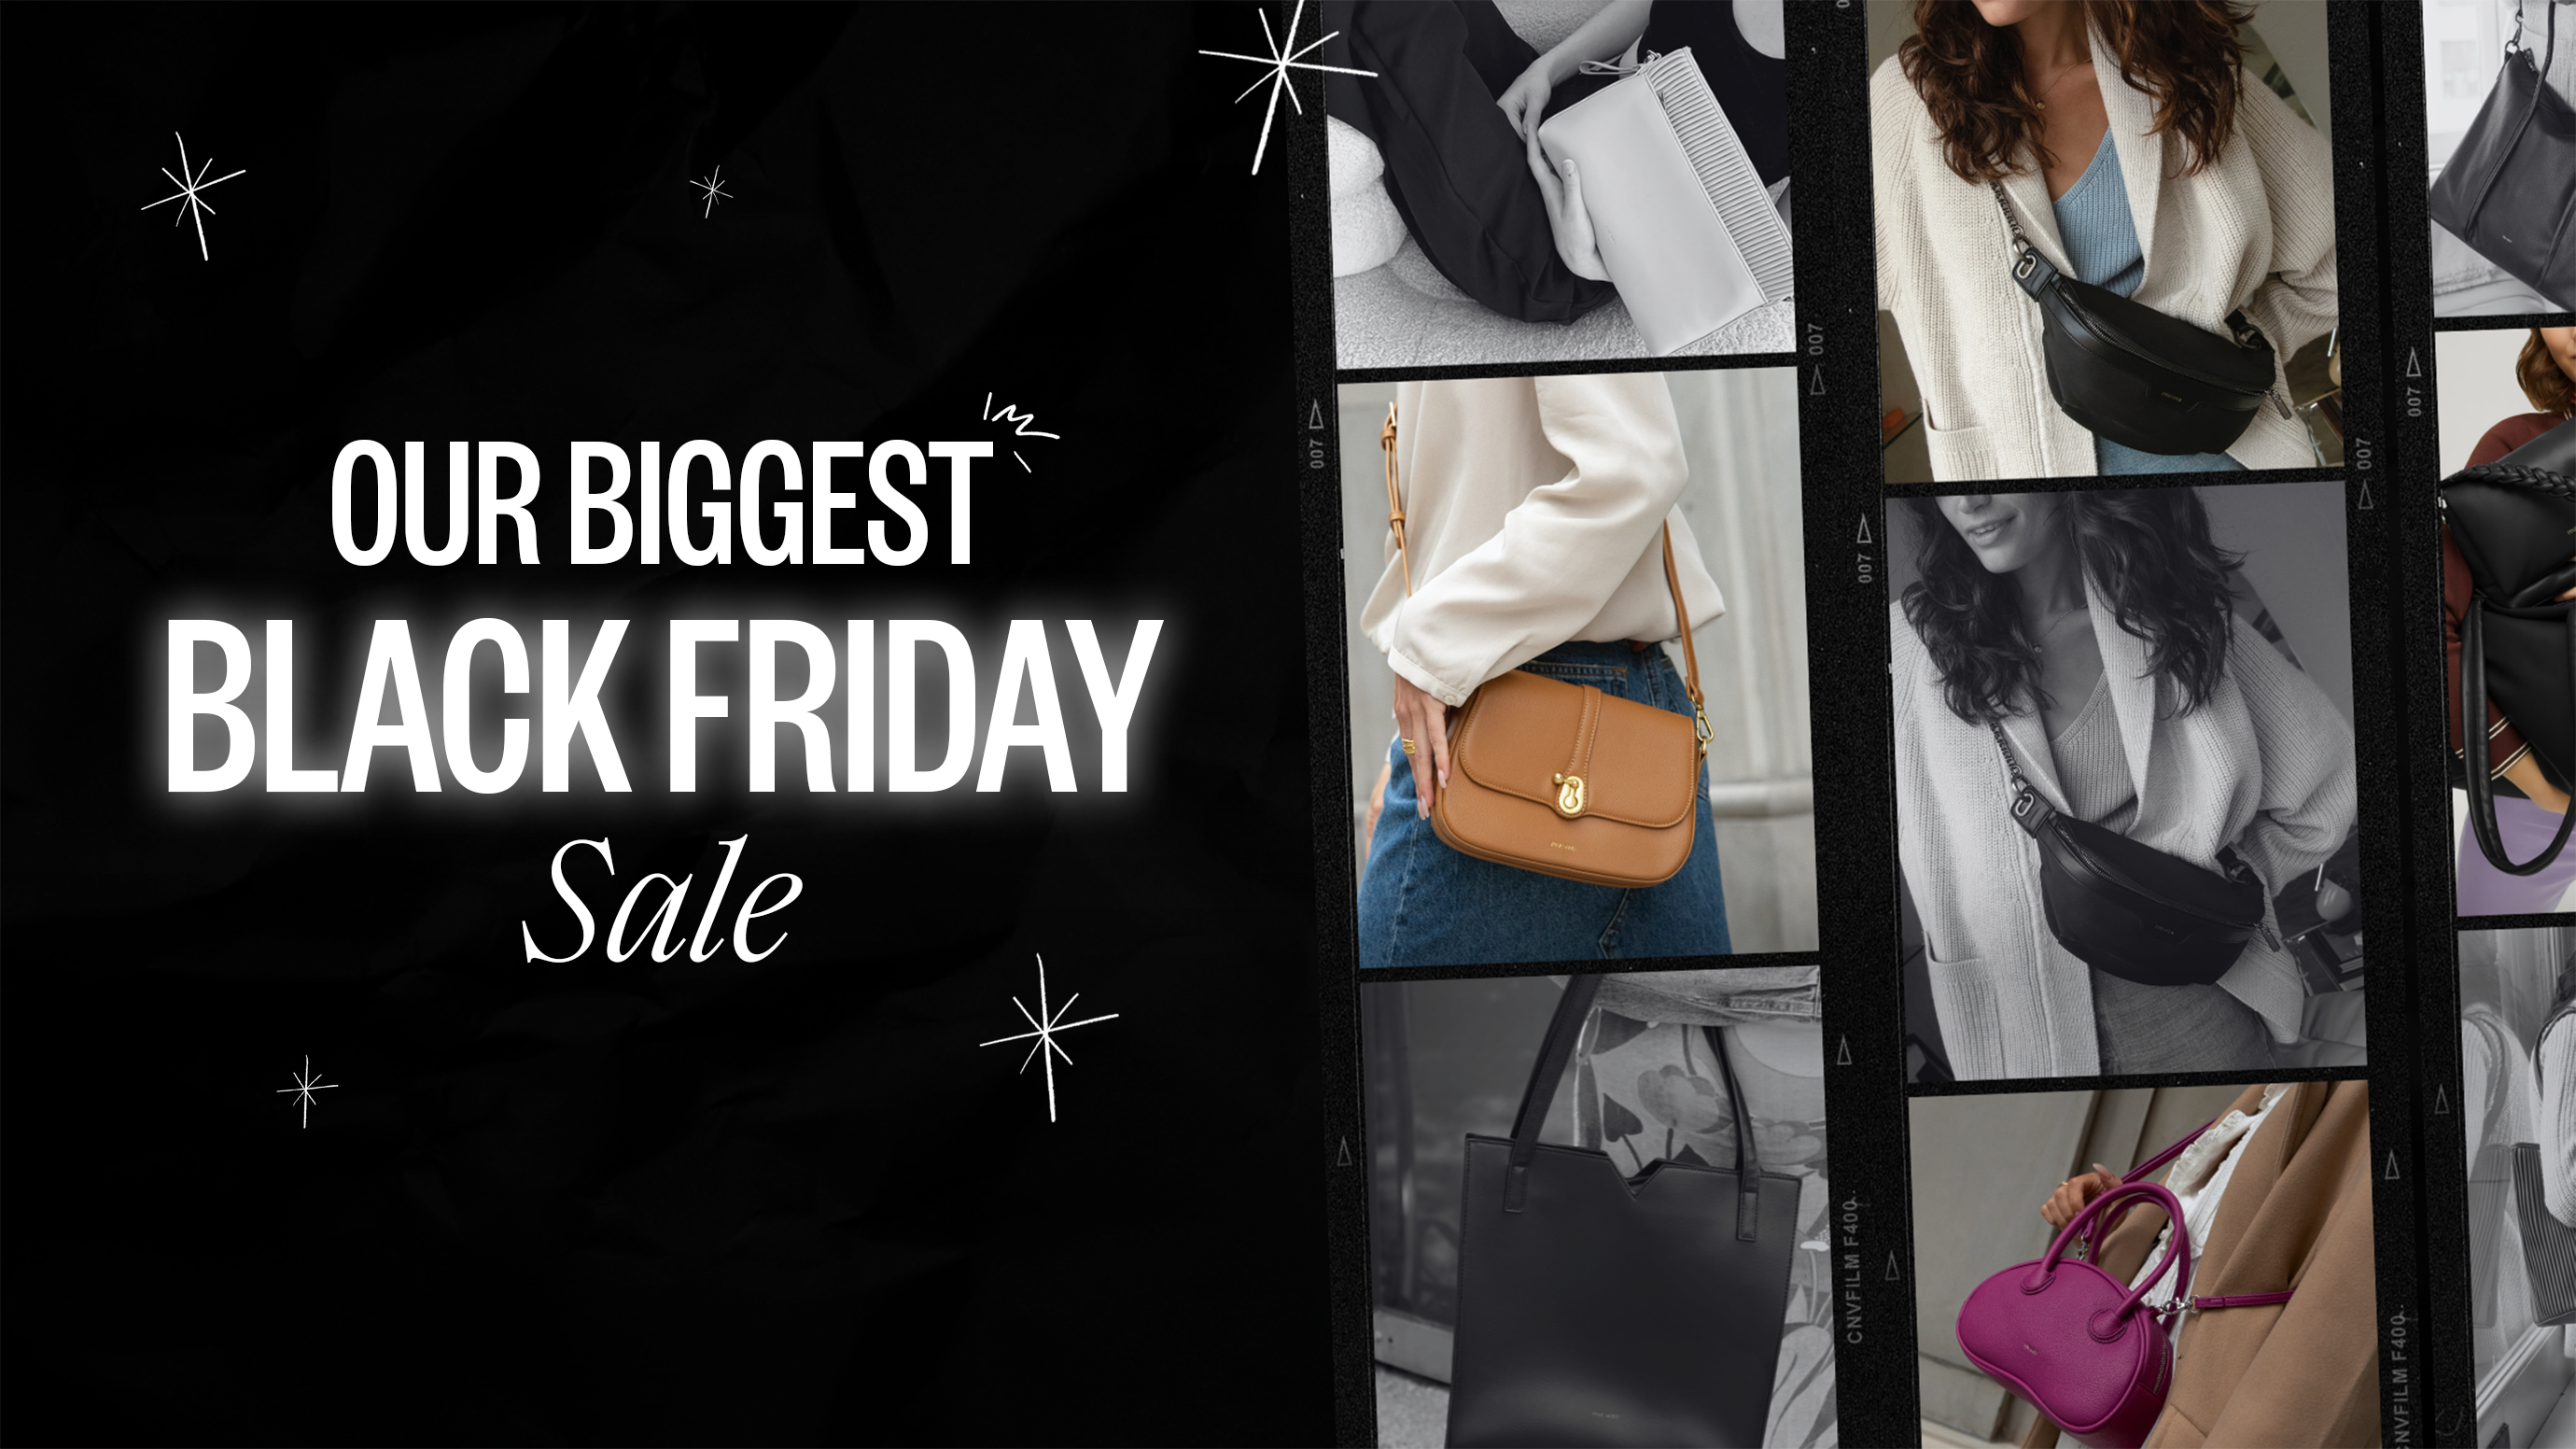 Pixie Mood Black Friday SALE - Save Up To 80% OFF!